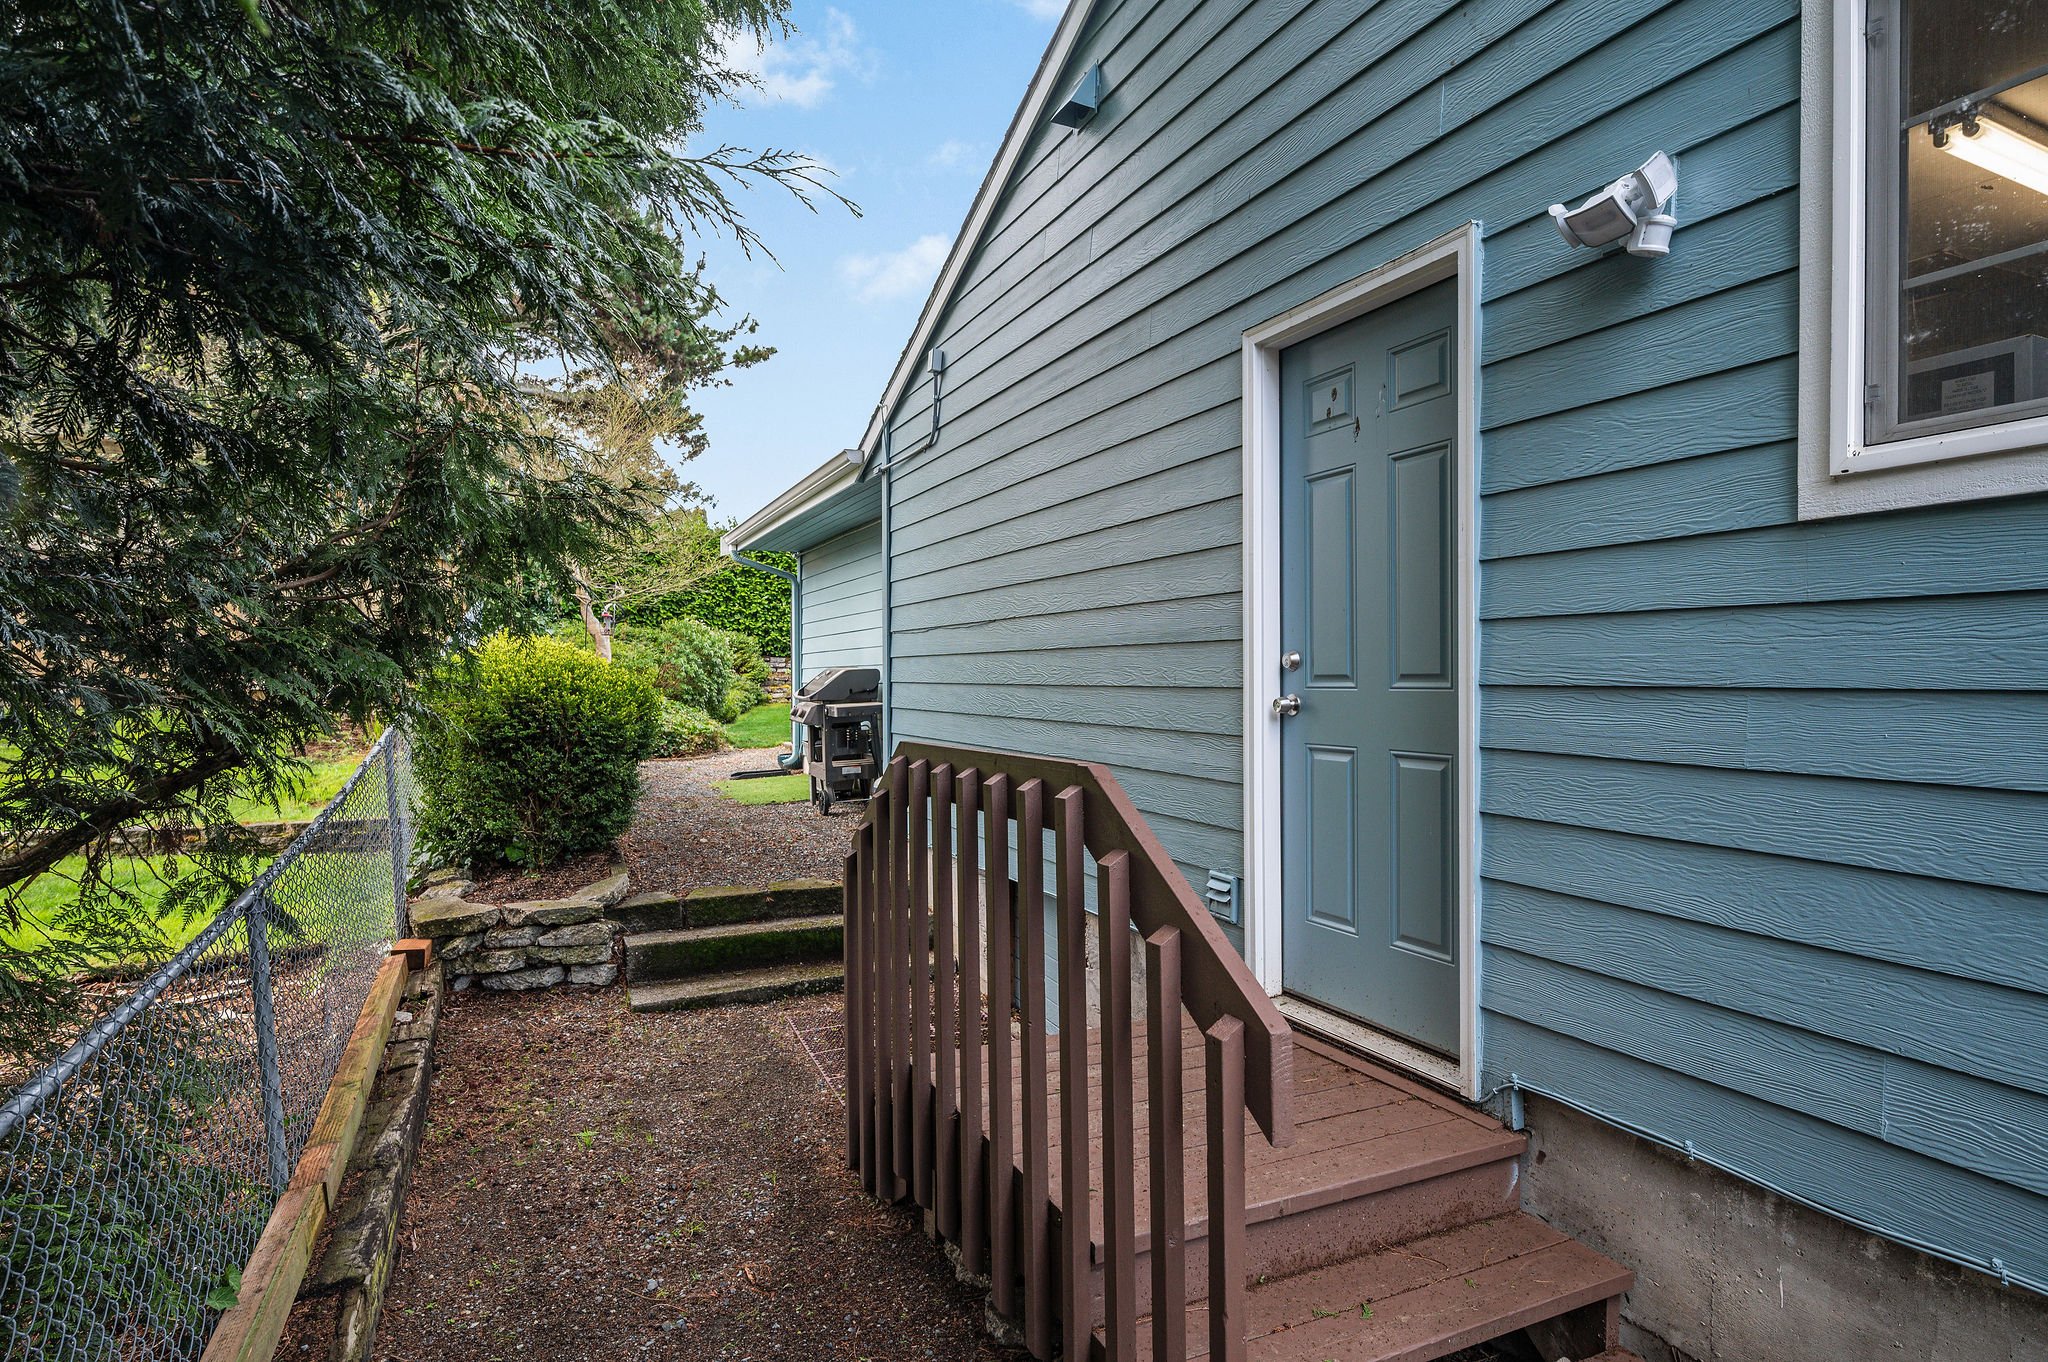  image description: exterior of one story blue house with view of side door and walkway 